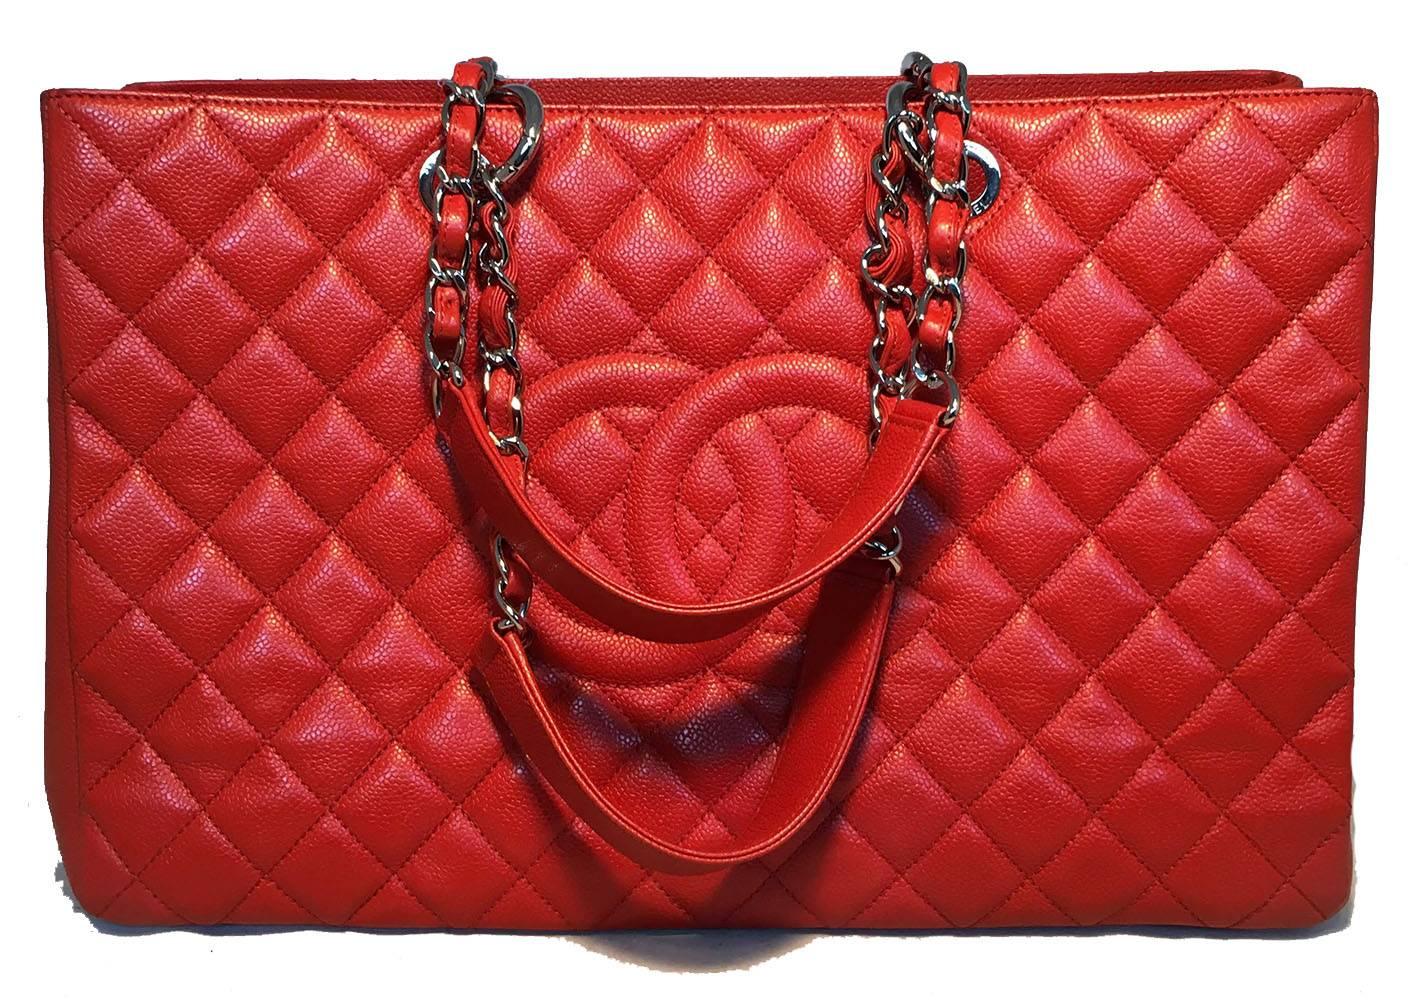 BEAUTIFUL Chanel Dark Red Orange Caviar Quilted Large Shopper Shoulder Bag Tote in excellent condition.  Orange red quilted caviar leather exterior trimmed with shining silver hardware. Interior lined in gray silk and holds 2 separate storage